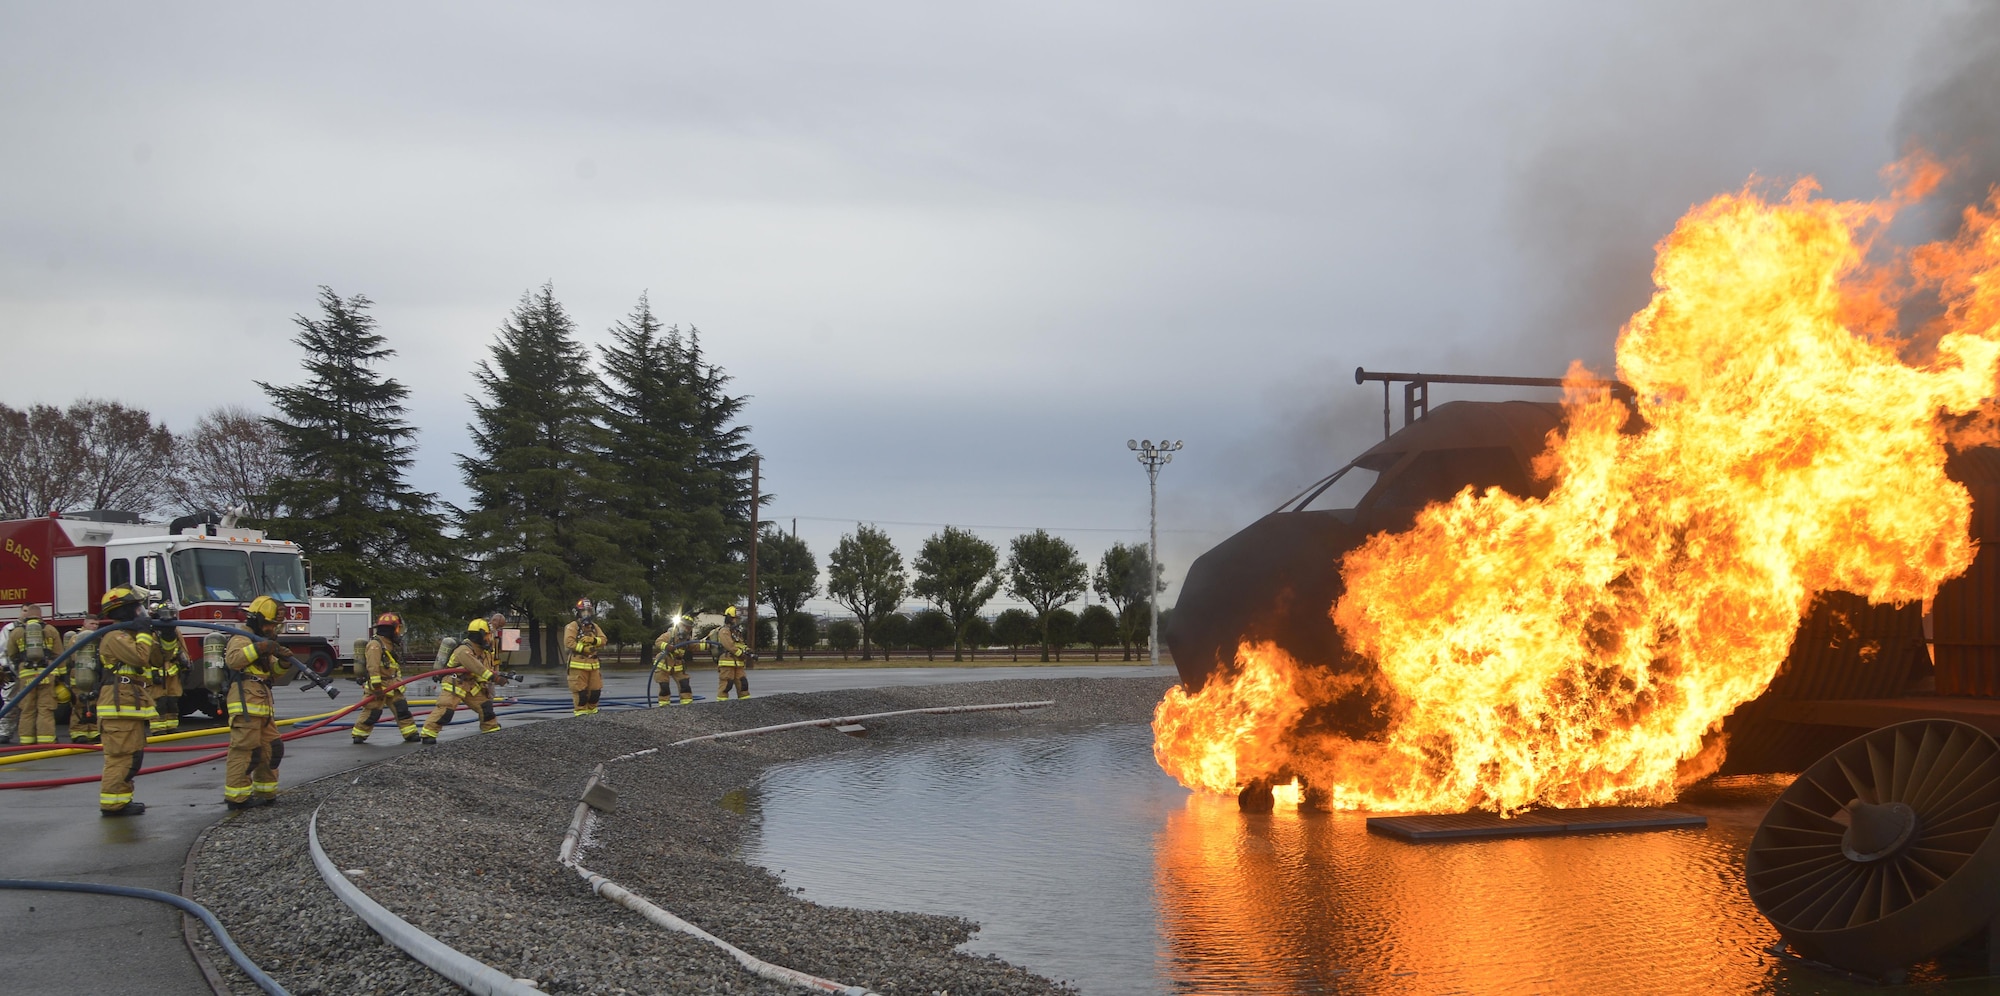 Firefighters with the 374th Civil Engineer Squadron prepare for a training scenario at Yokota Air Base, Japan, Dec. 14, 2016. During the training the firefighters were split into three teams of two, with two teams extinguishing the fires and the remaining team on standby providing a safety line to help the primary teams. (U.S. Air Force photo by Staff Sgt. David Owsianka)